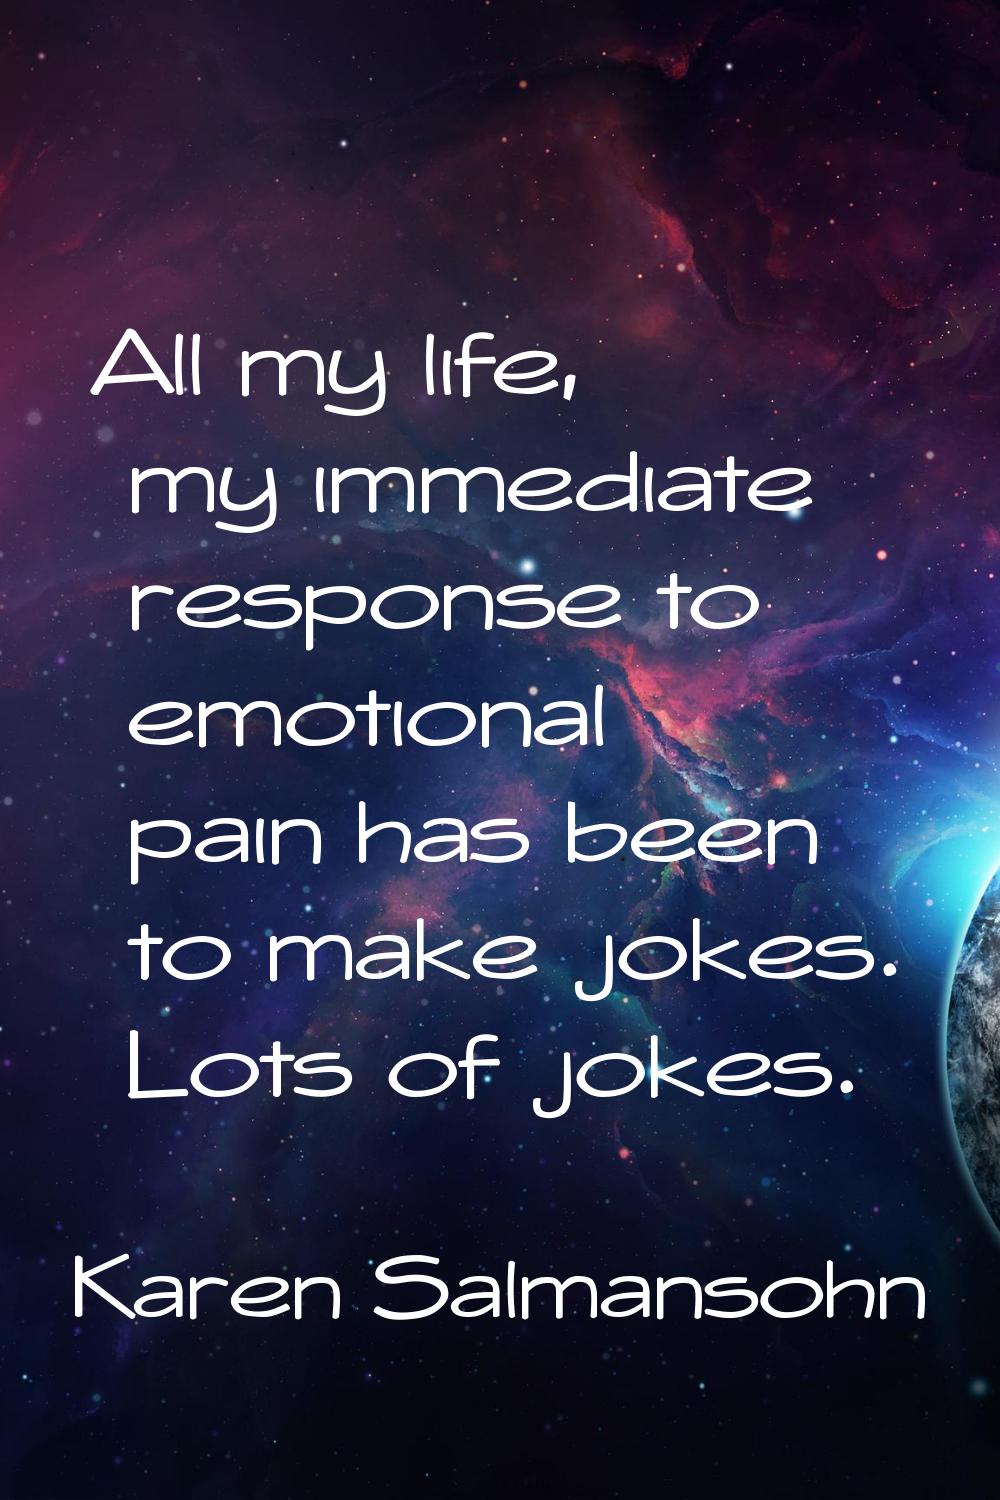 All my life, my immediate response to emotional pain has been to make jokes. Lots of jokes.